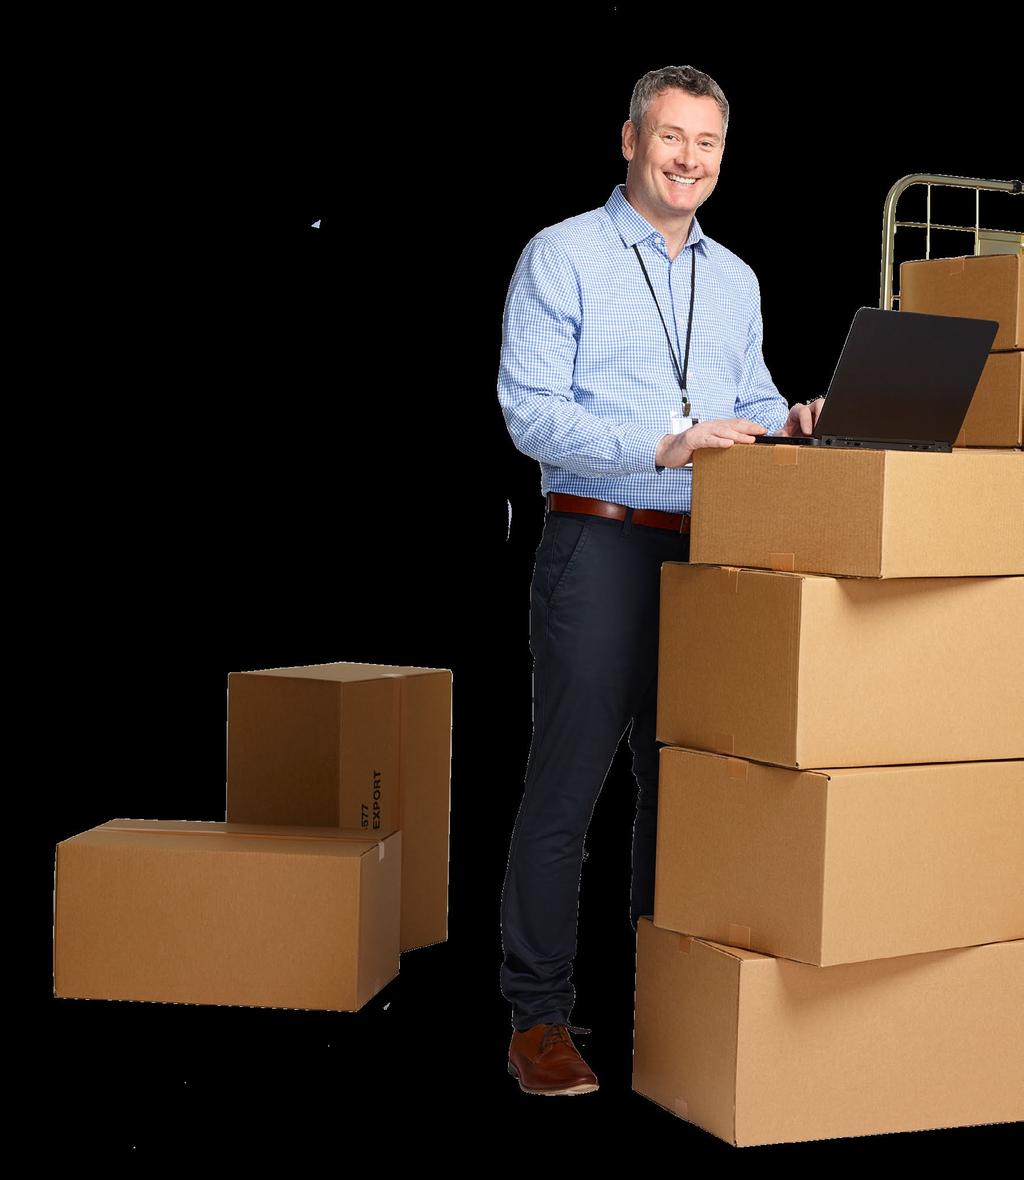 Inventory Management Perform full or partial inventory counts and variance management. Check availability of any item at any location at any time.